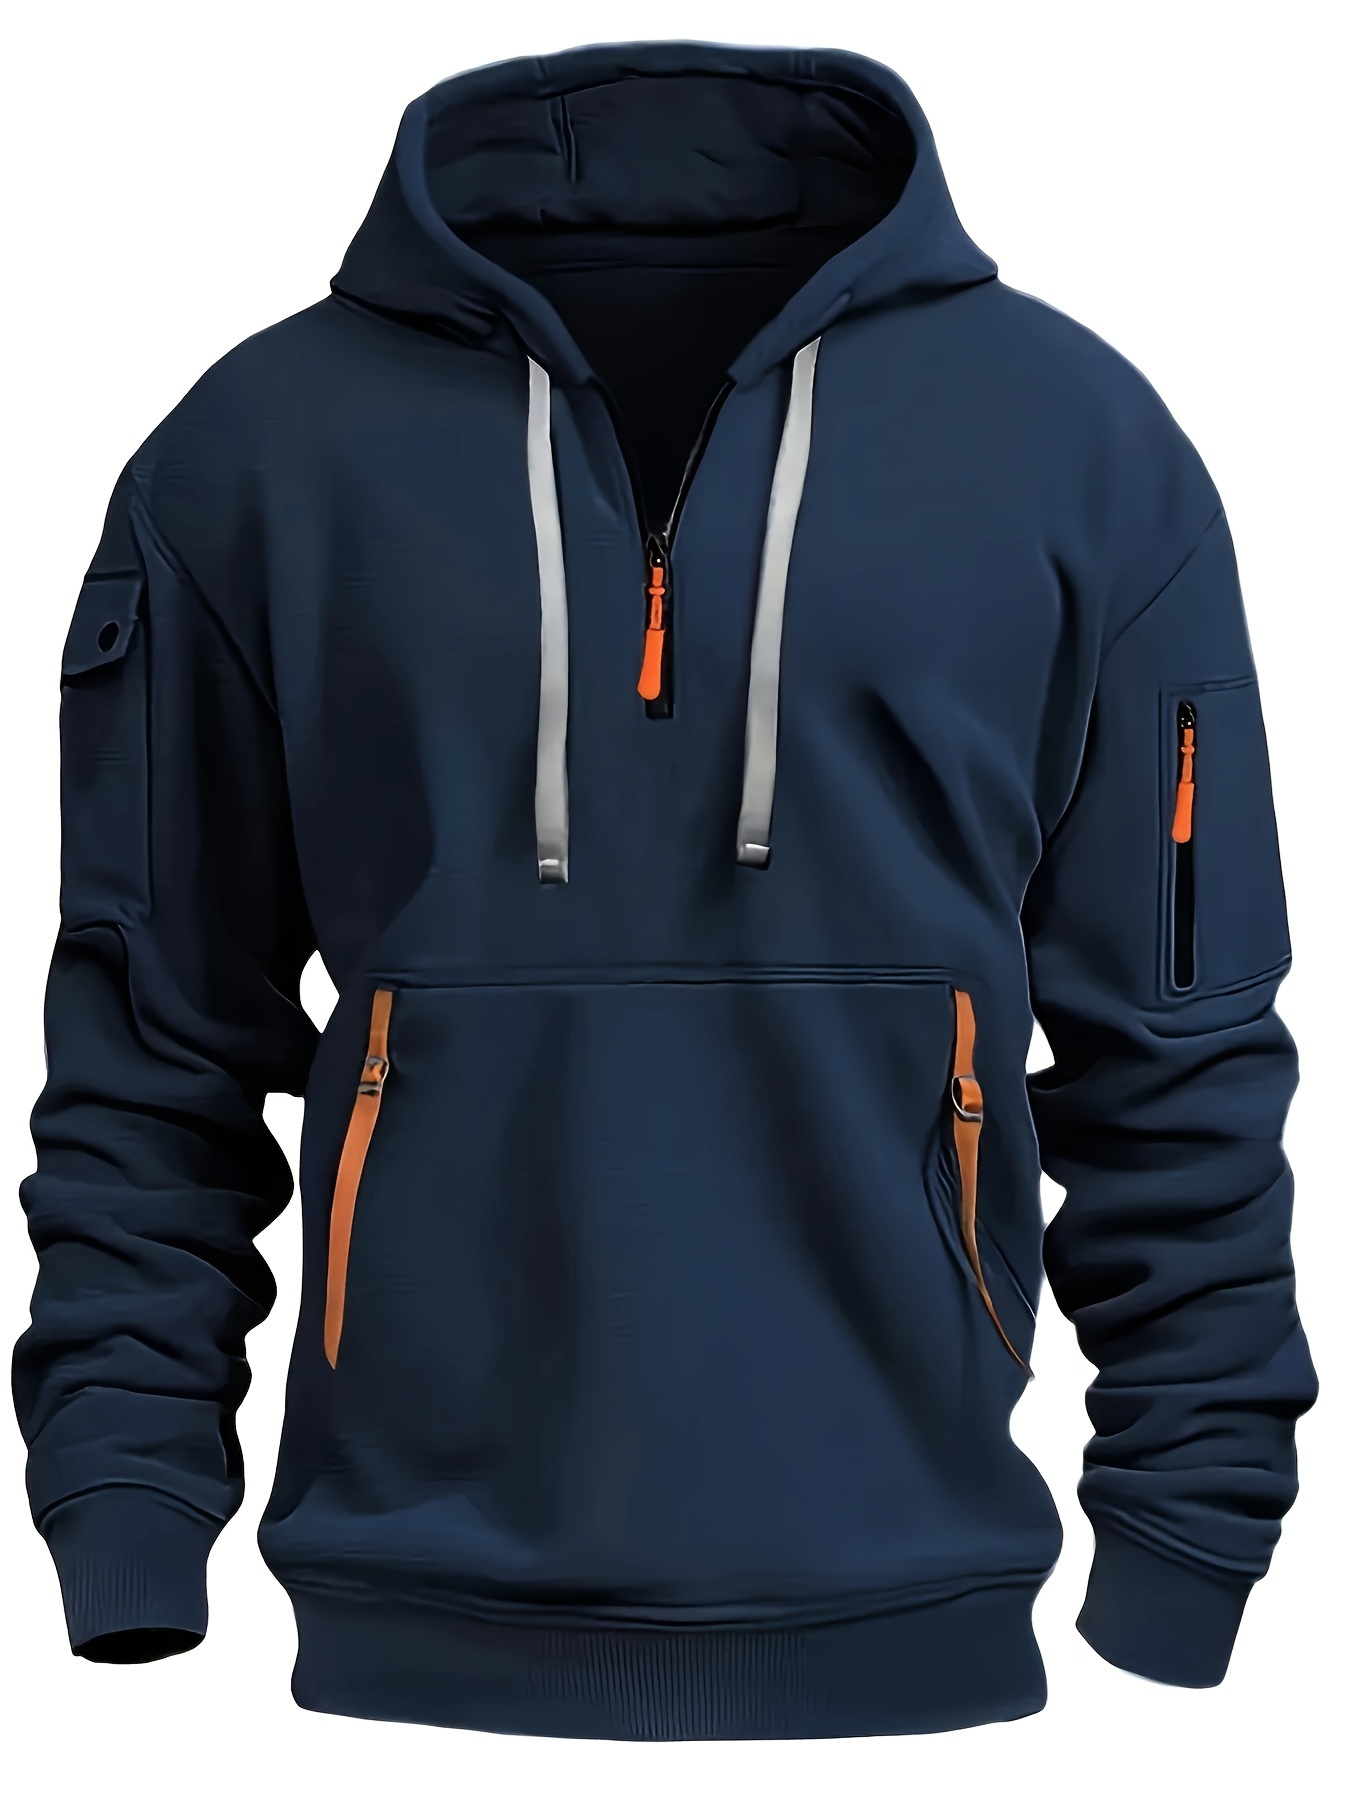 mens fashion half zipped sports hoodie with pockets casual athletic pullover comfortable fit sweatshirt with hood details 5